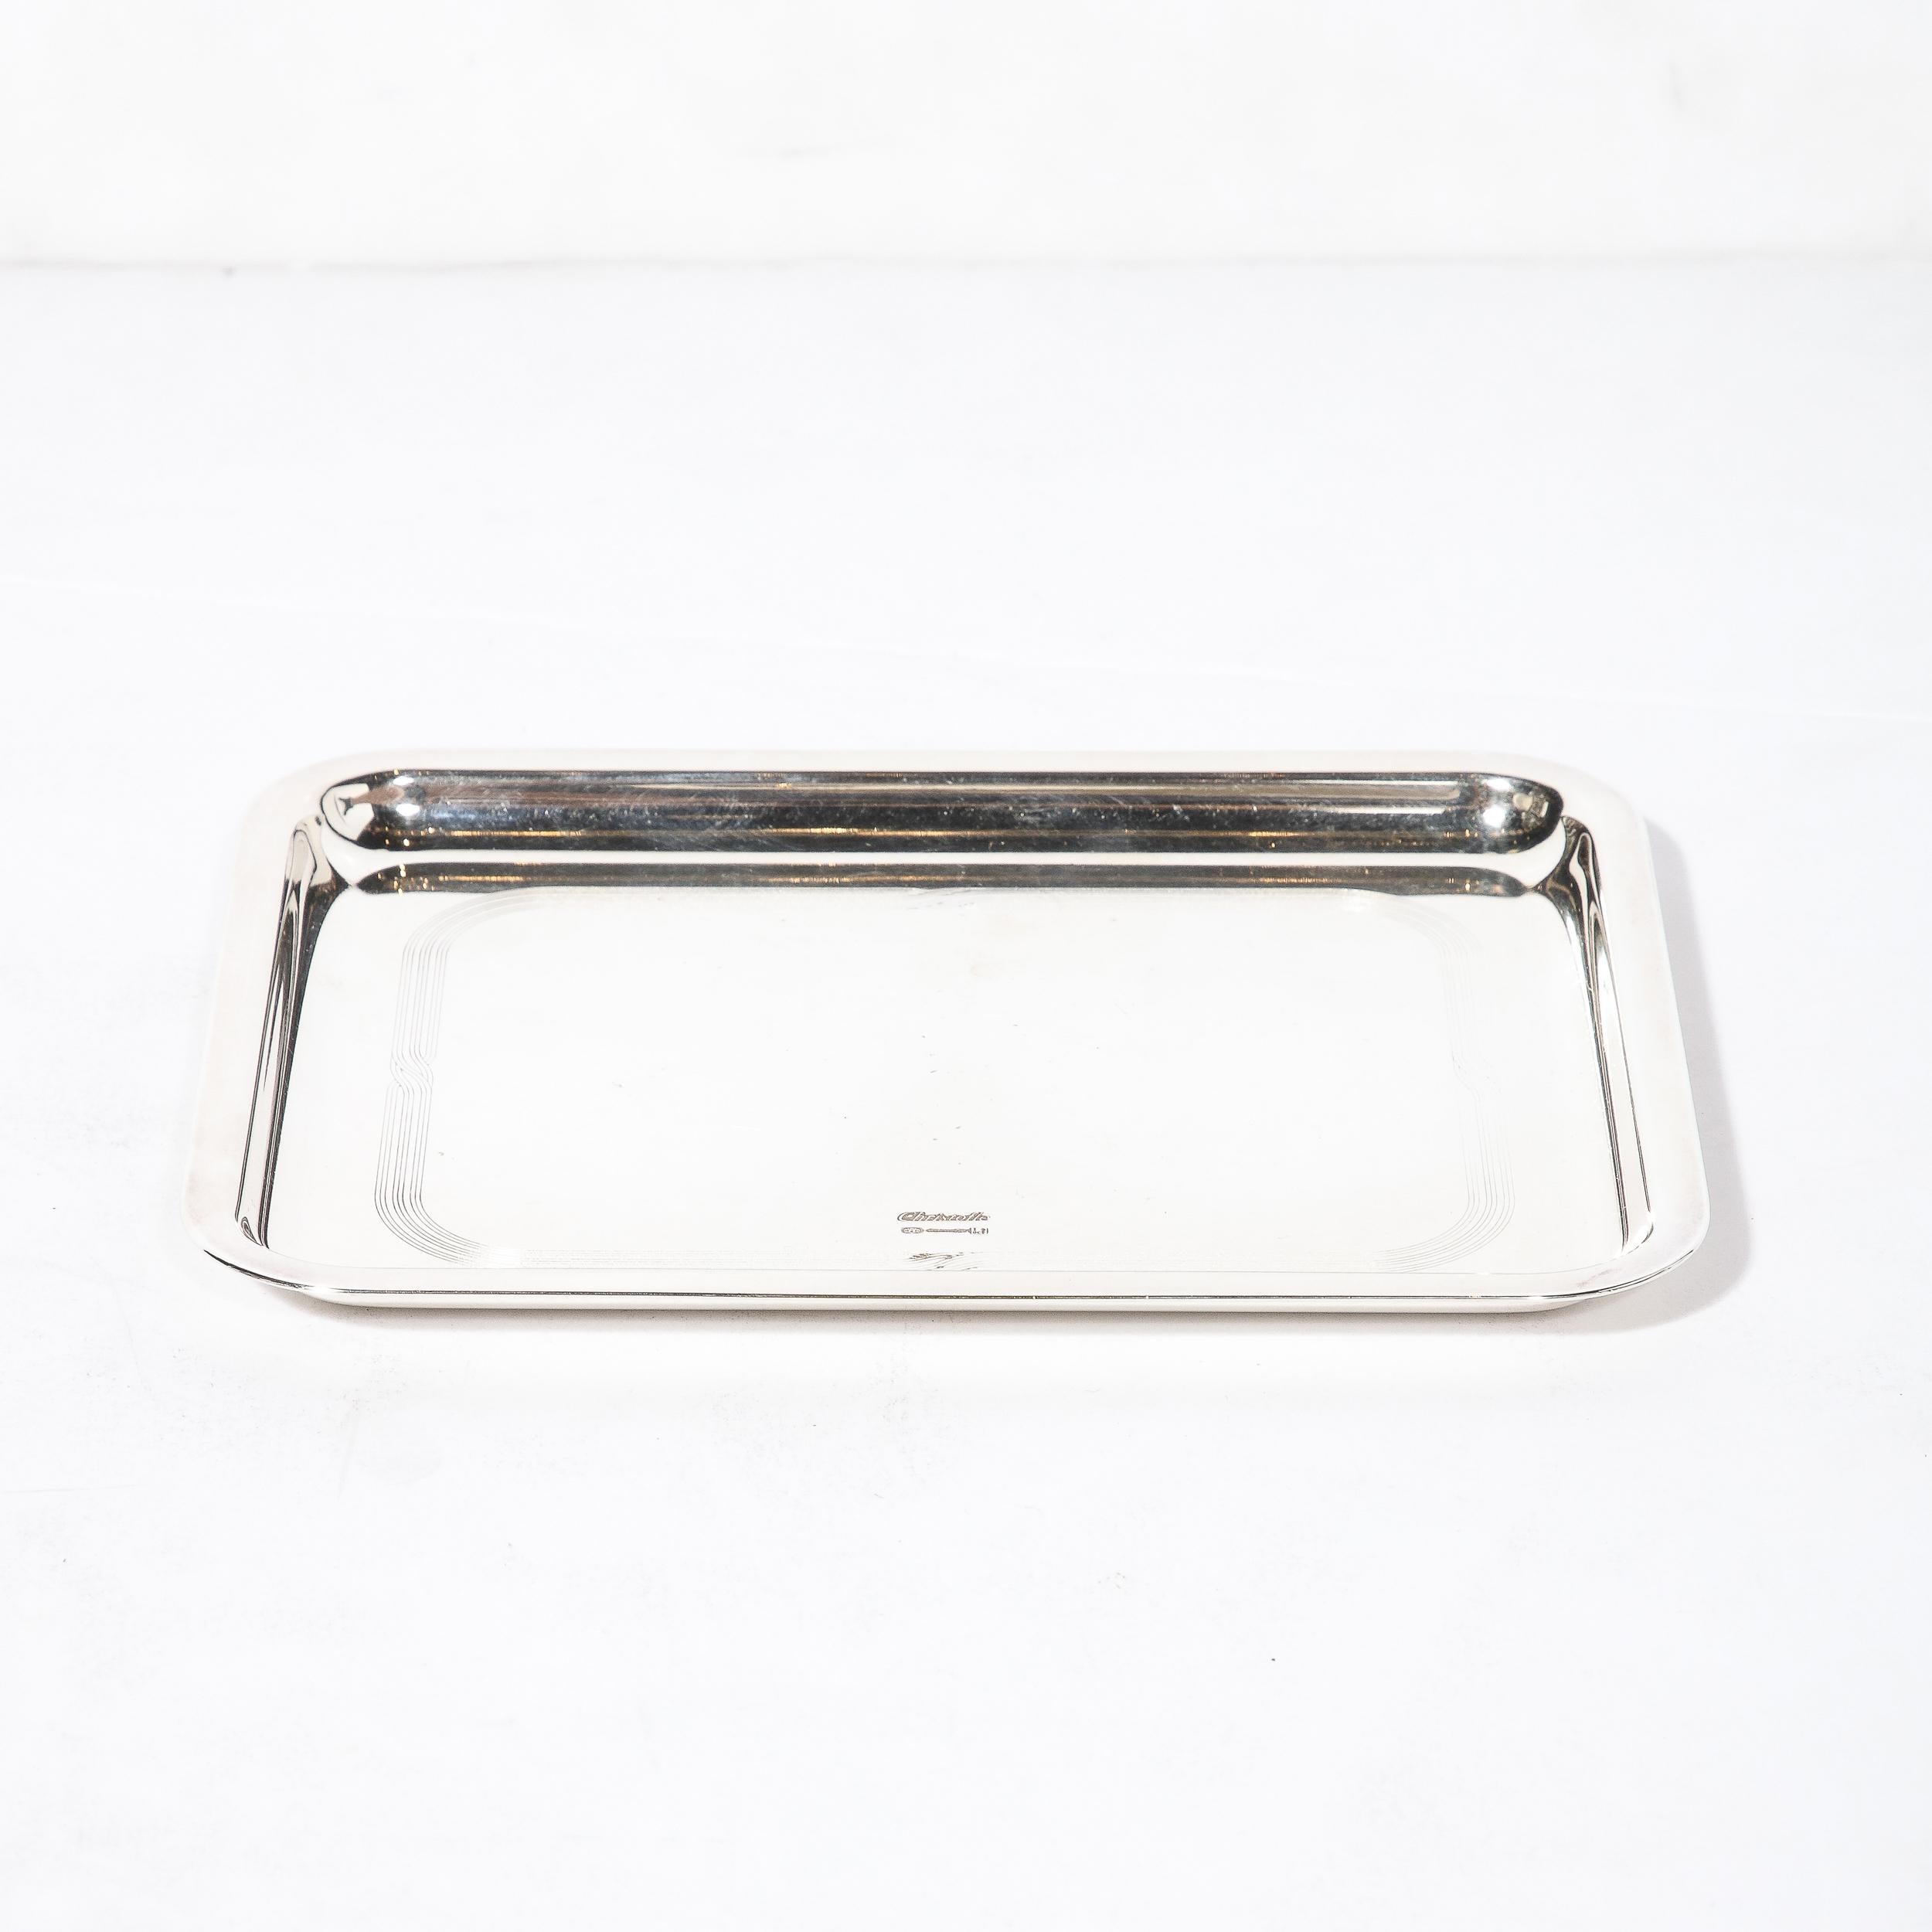 Christofle Silver-Plated Art Deco Style Tray with Engine Turned Engraving 1